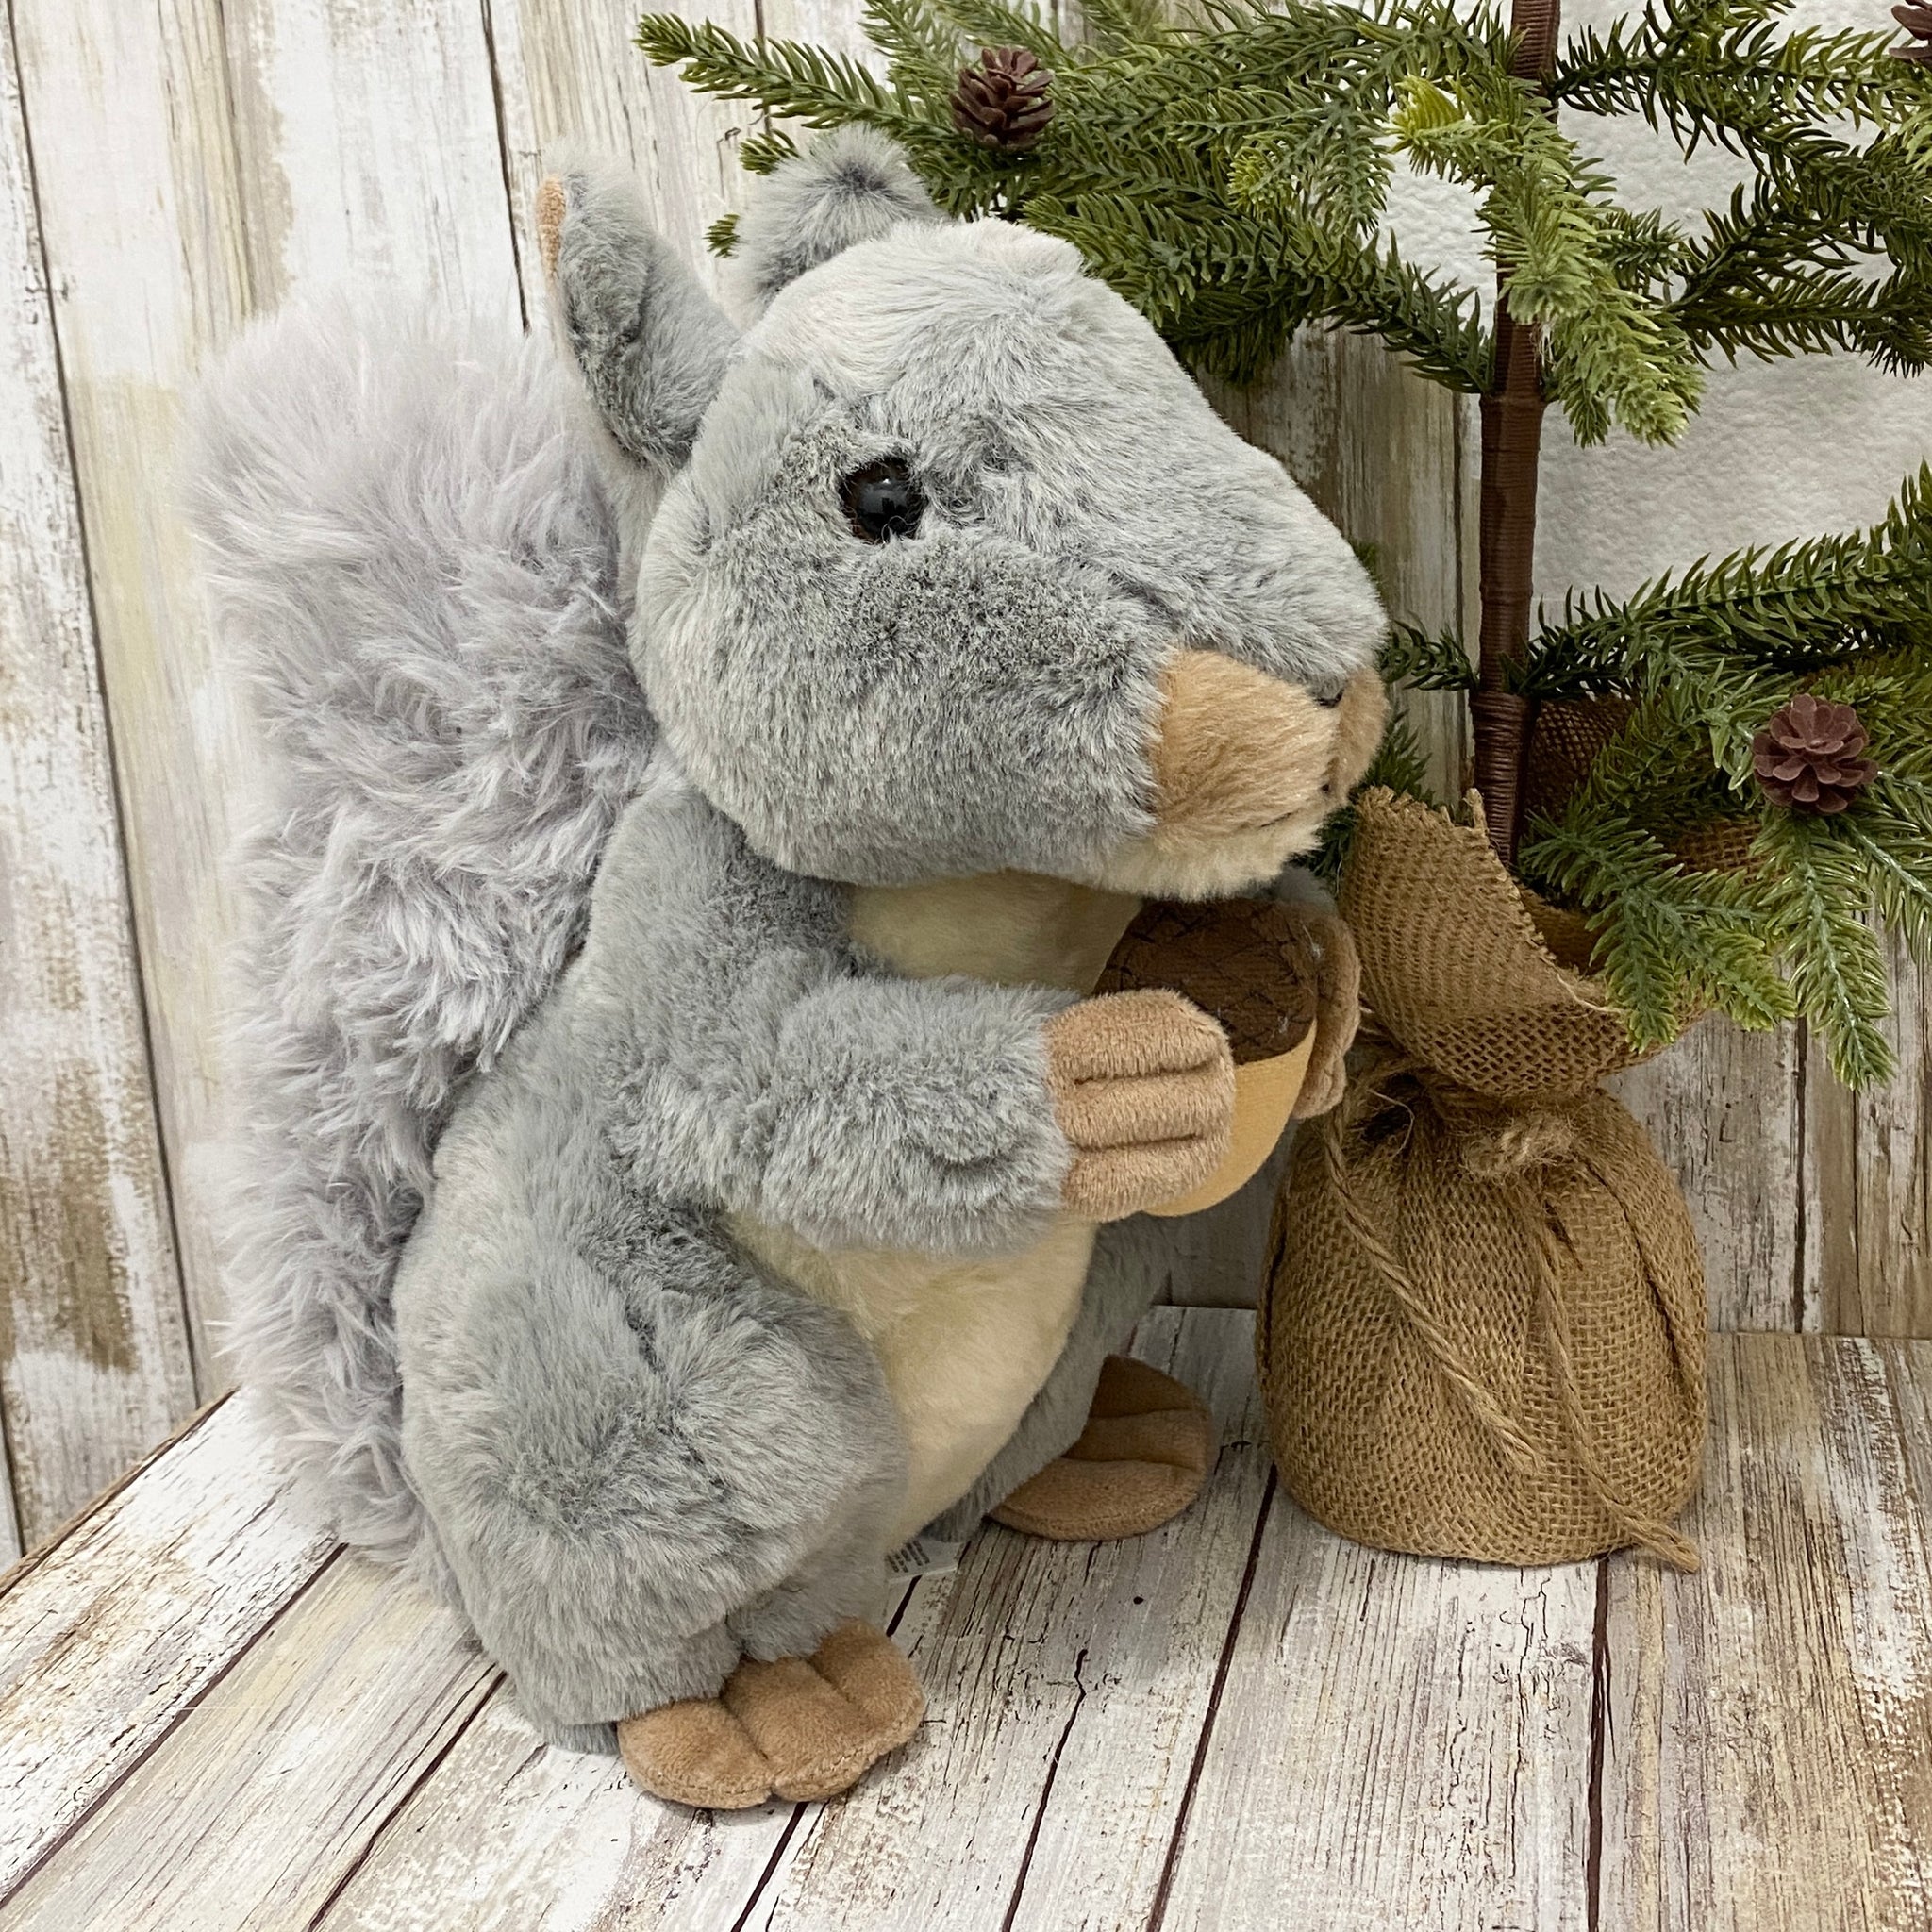 Wild Onez Squirrel - 12 inch Plushy Stuffed Animal - Recycled Materials - The Petting Zoo